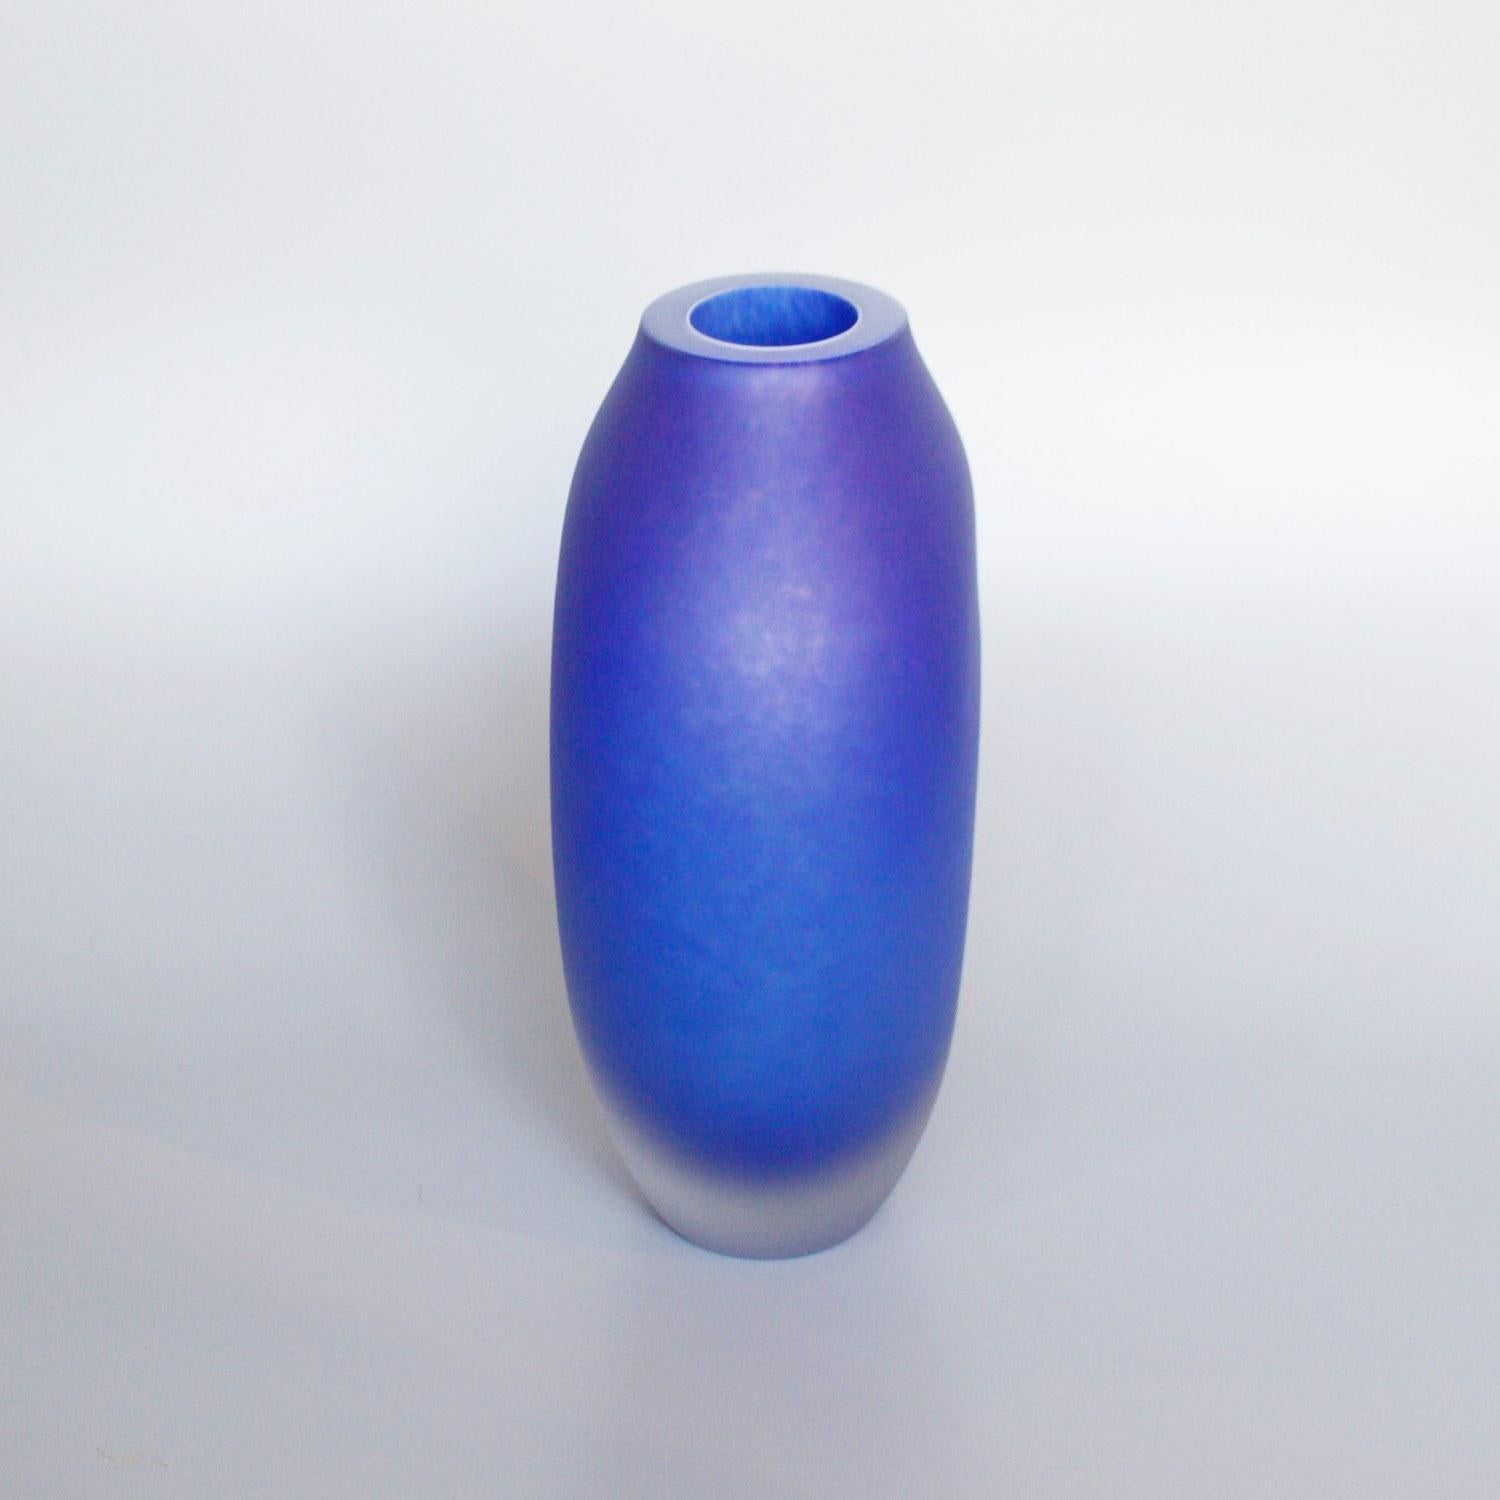 Italian Frosted Blue Murano Glass Vase by Ercole Barovier for Barovier & Toso circa 1970